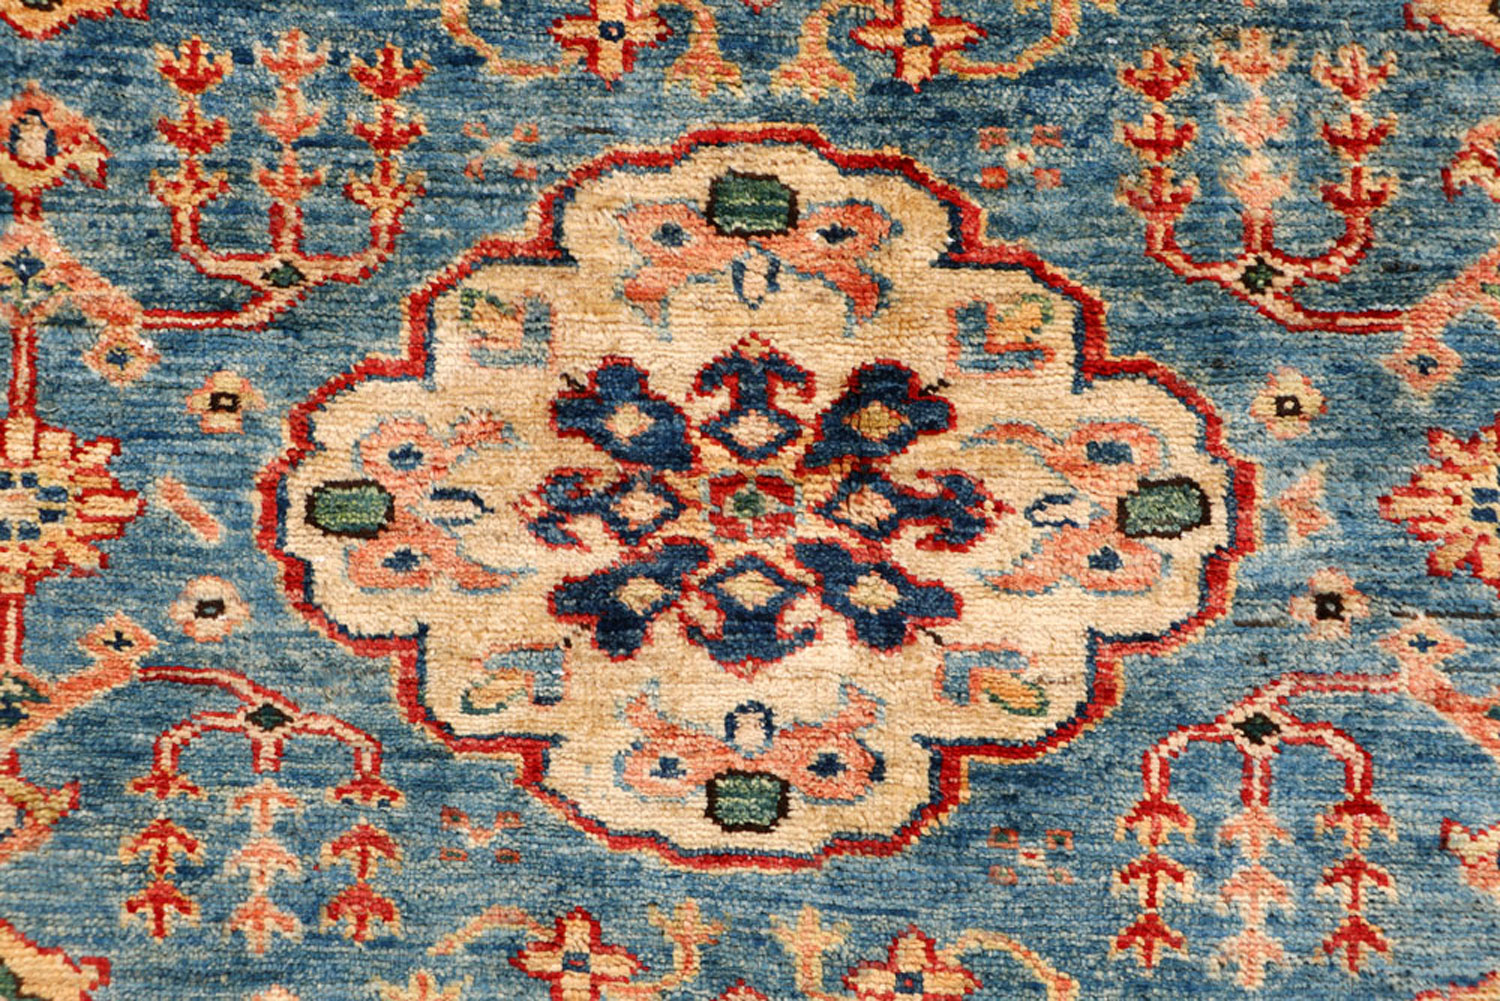 How Are Rugs Made